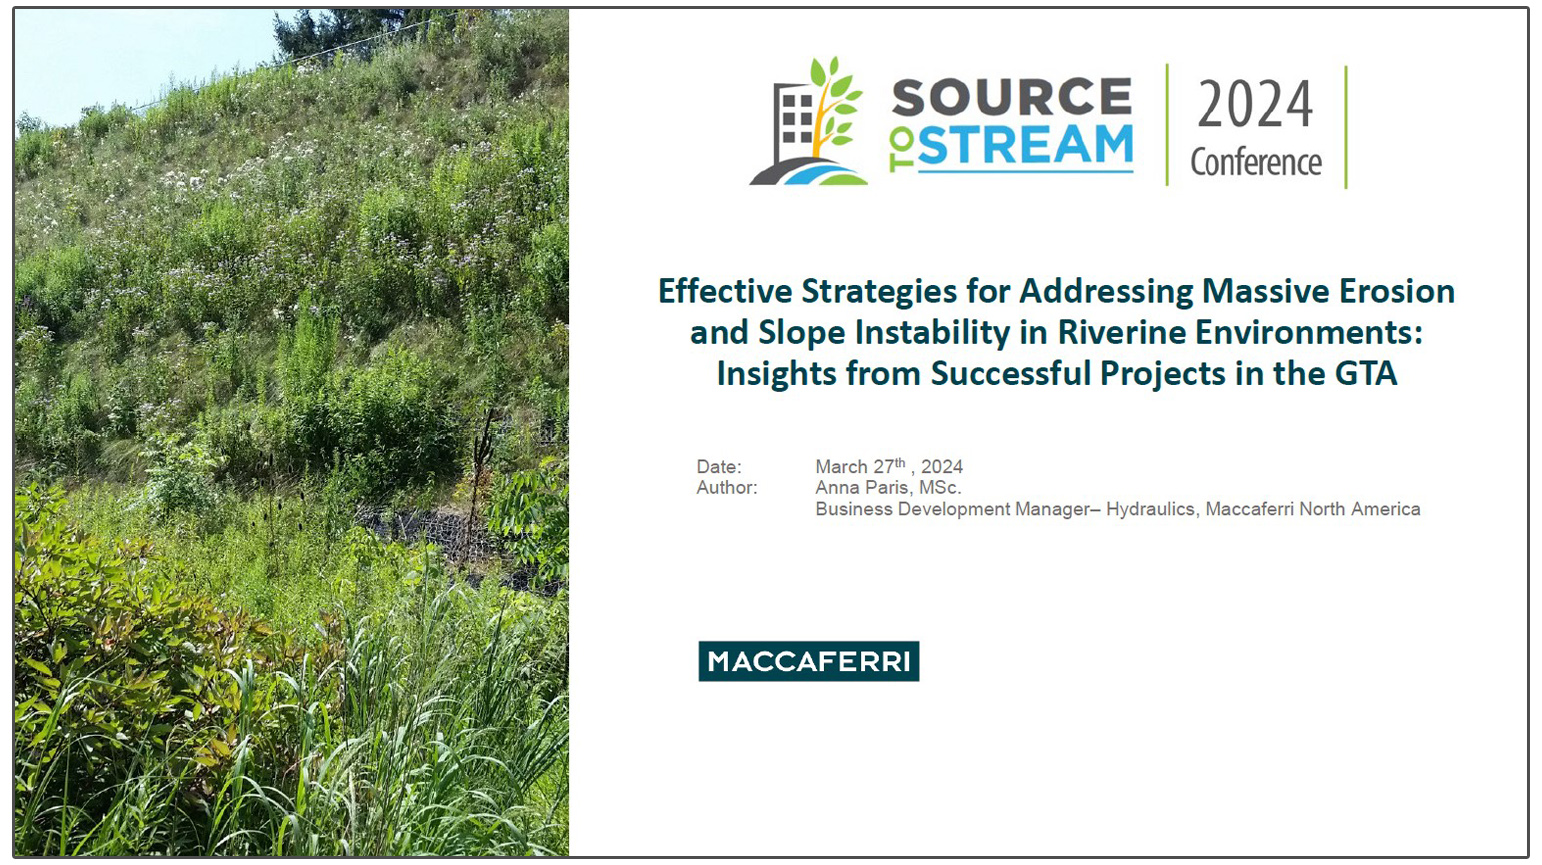 Effective Strategies for Addressing Massive Erosion and Slope Instability in Riverine Environments - Insights from Successful Projects in the GTA - presentation by Anna Paris and Santino Tersigni